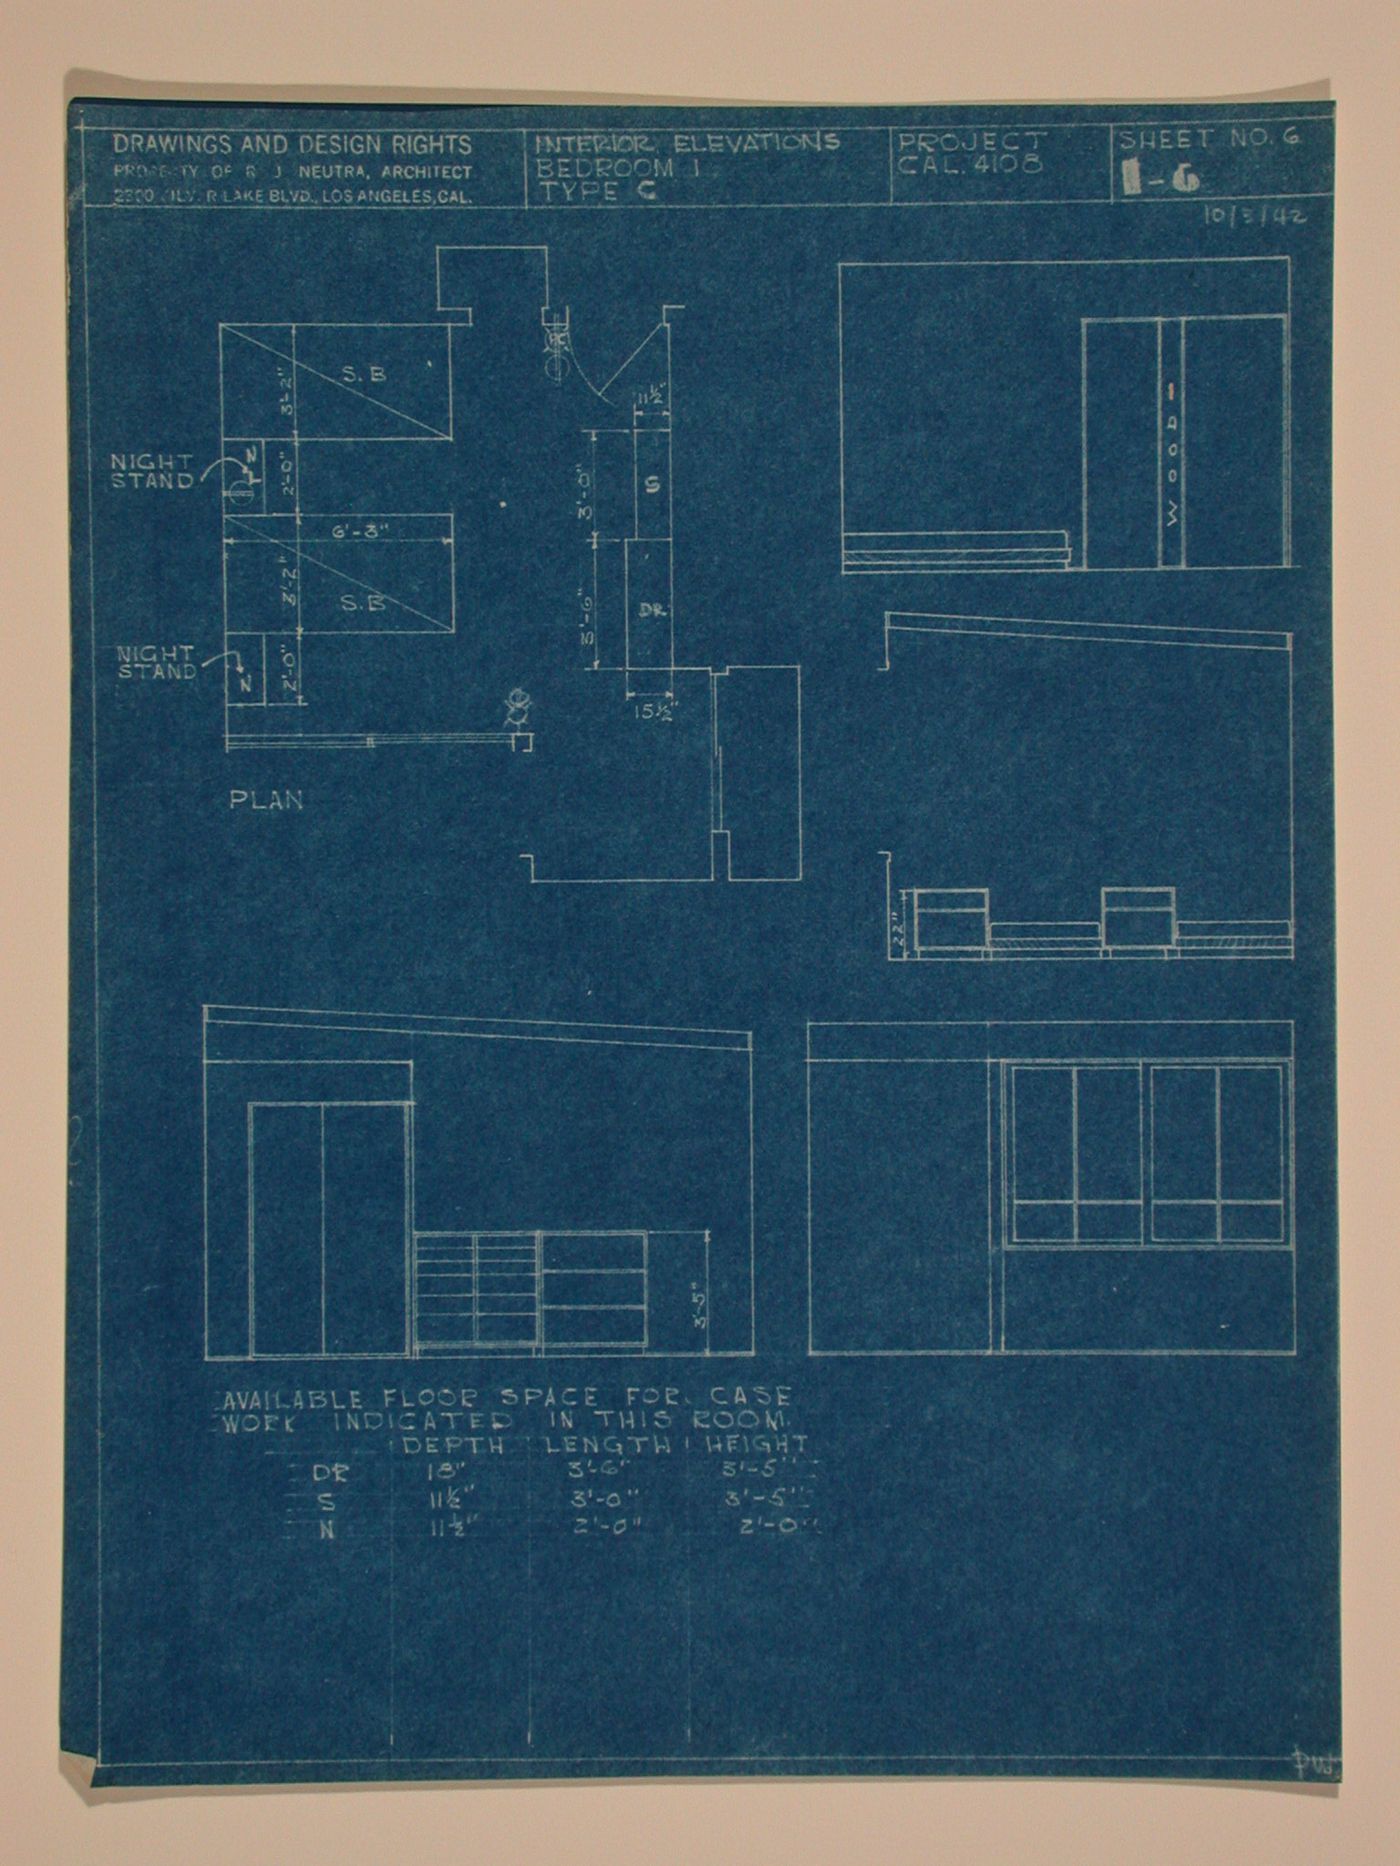 Interior elevations and plan for bedroom no. 1 type "C"